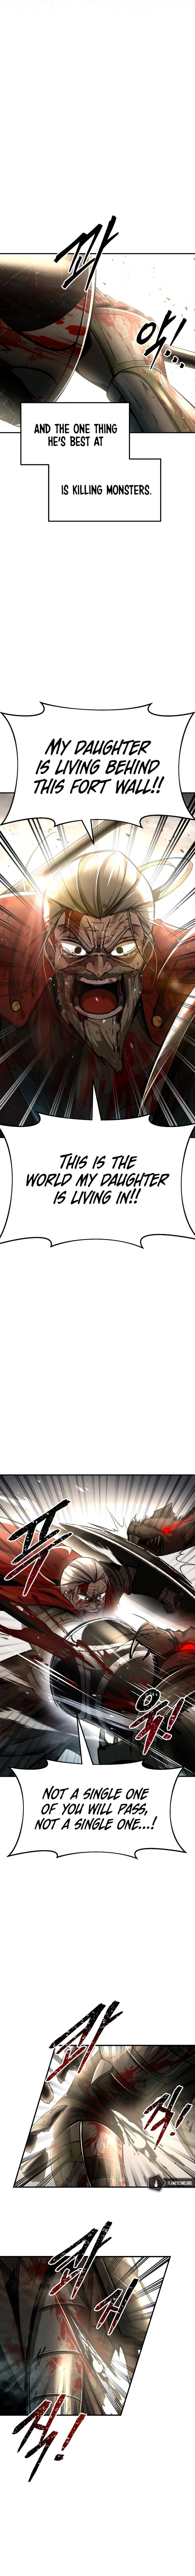 tyrant-of-the-tower-defense-game-chap-33-15